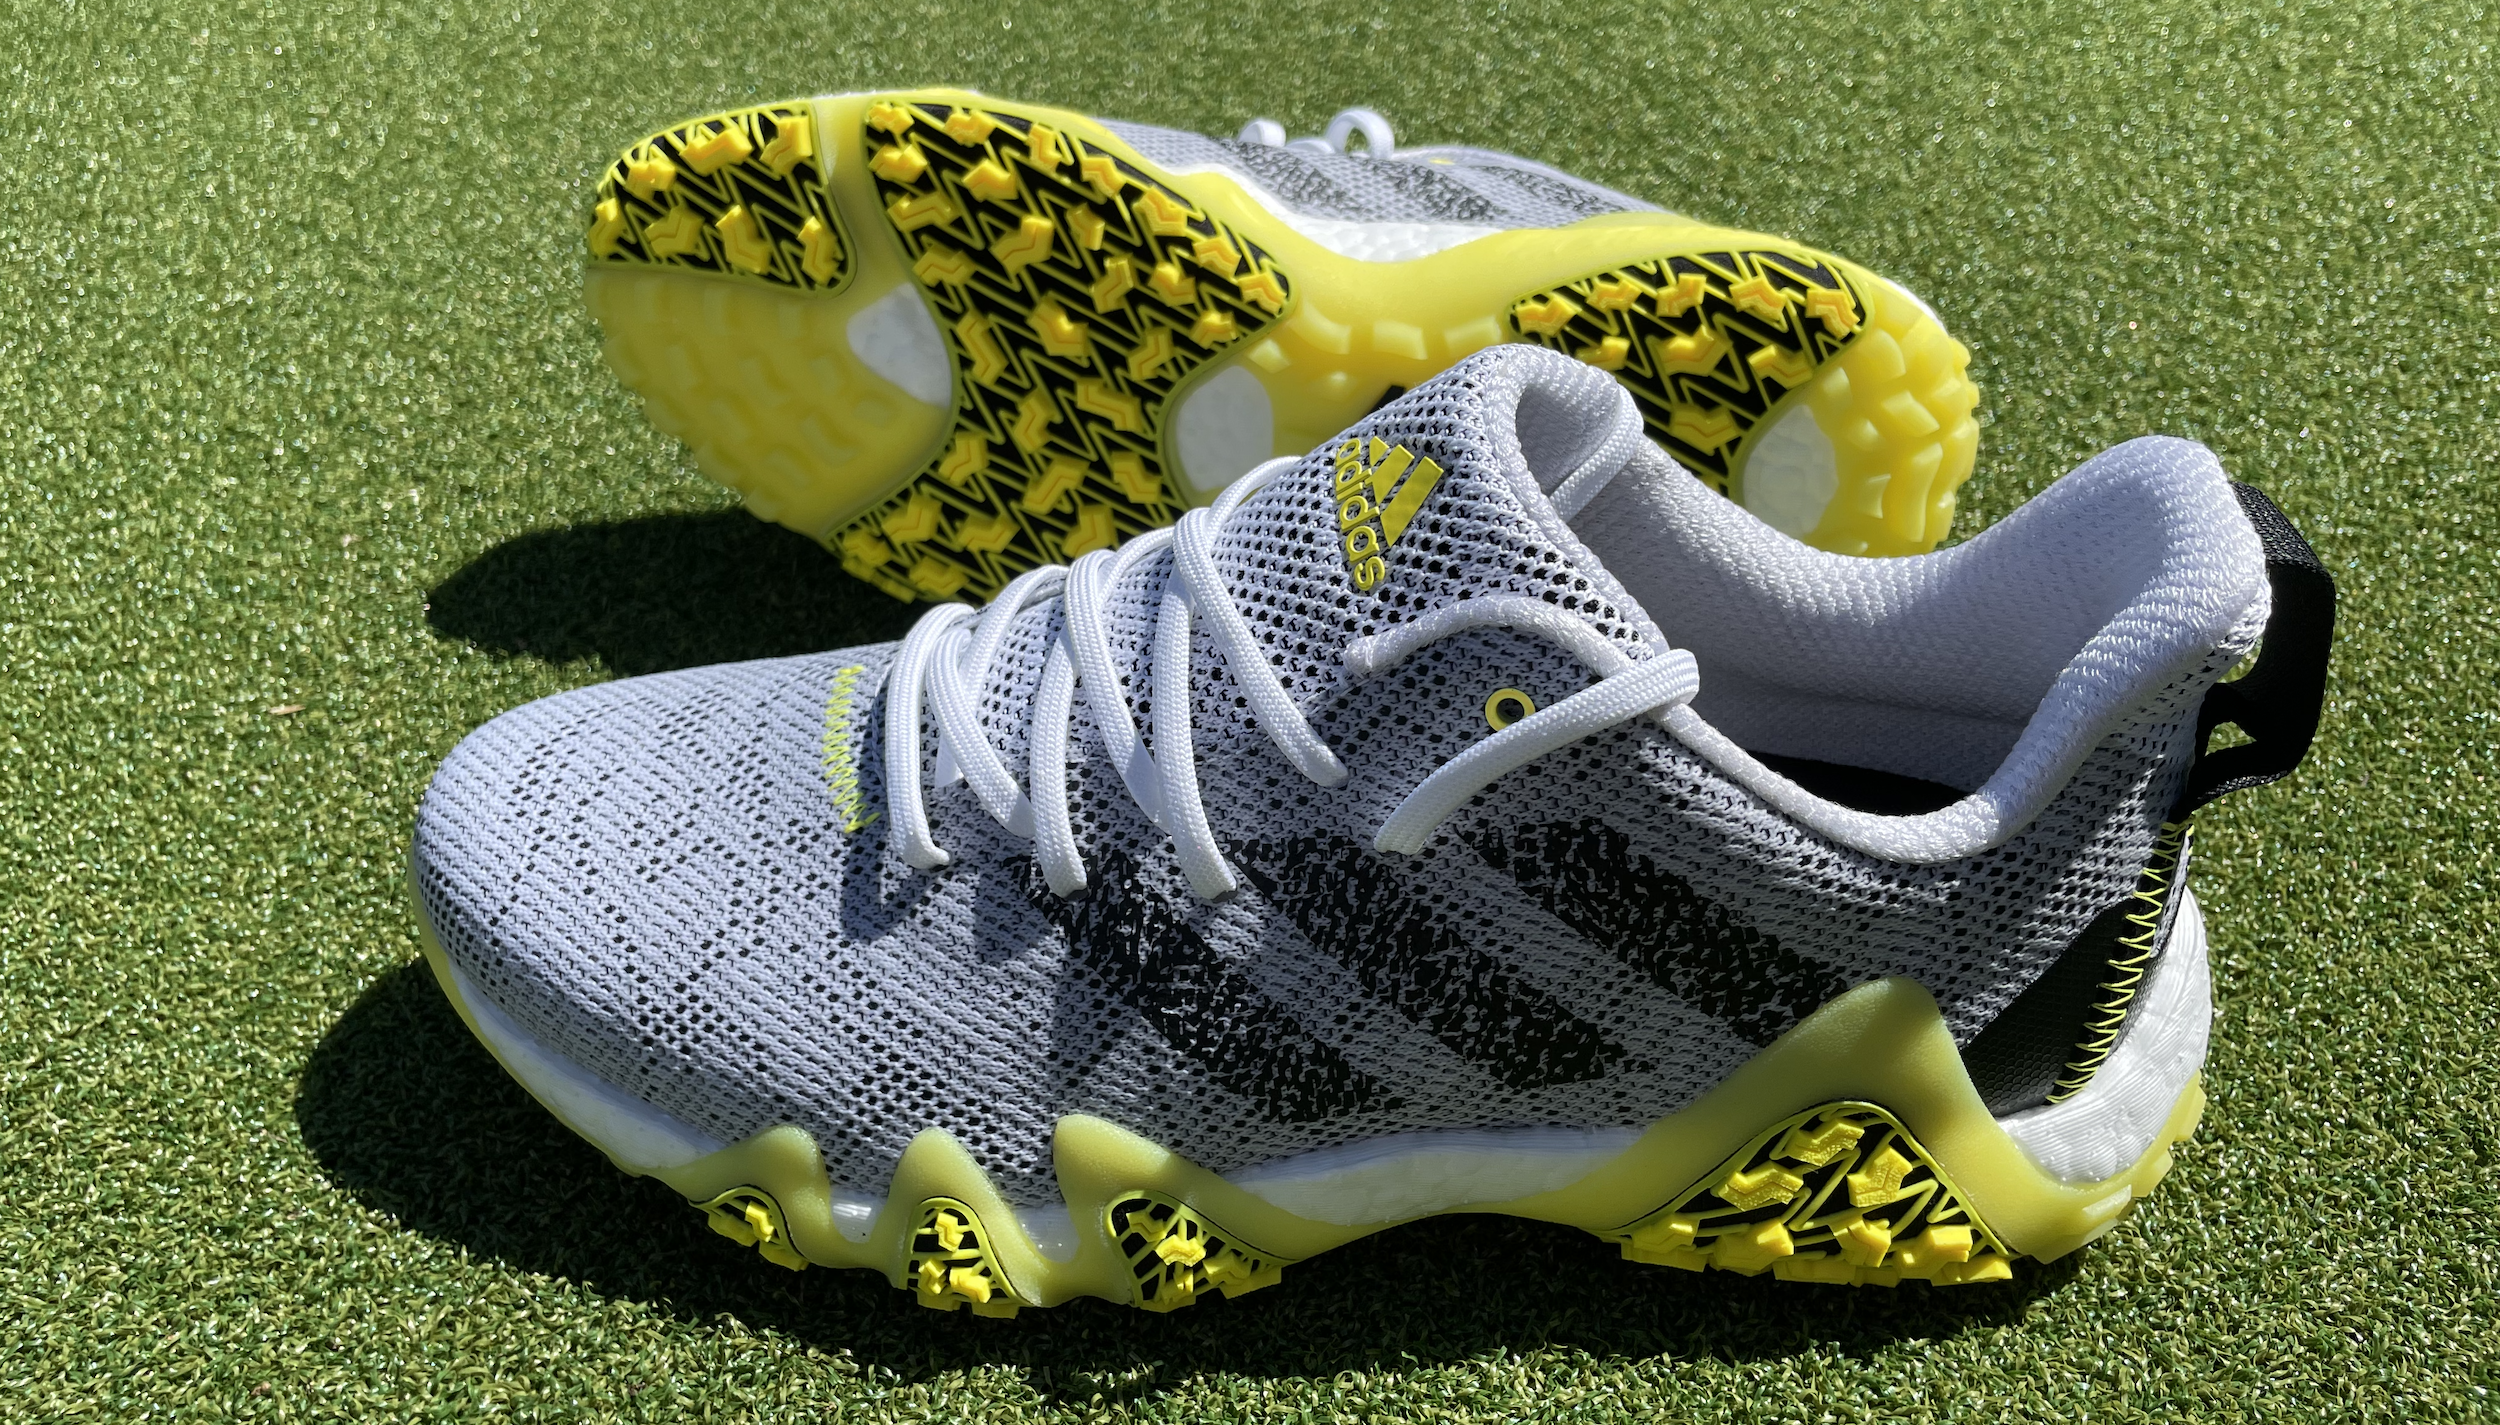 træfning skrot Blind Adidas CODECHAOS 22 review: possibly the most comfortable golf shoe I've  ever worn | T3